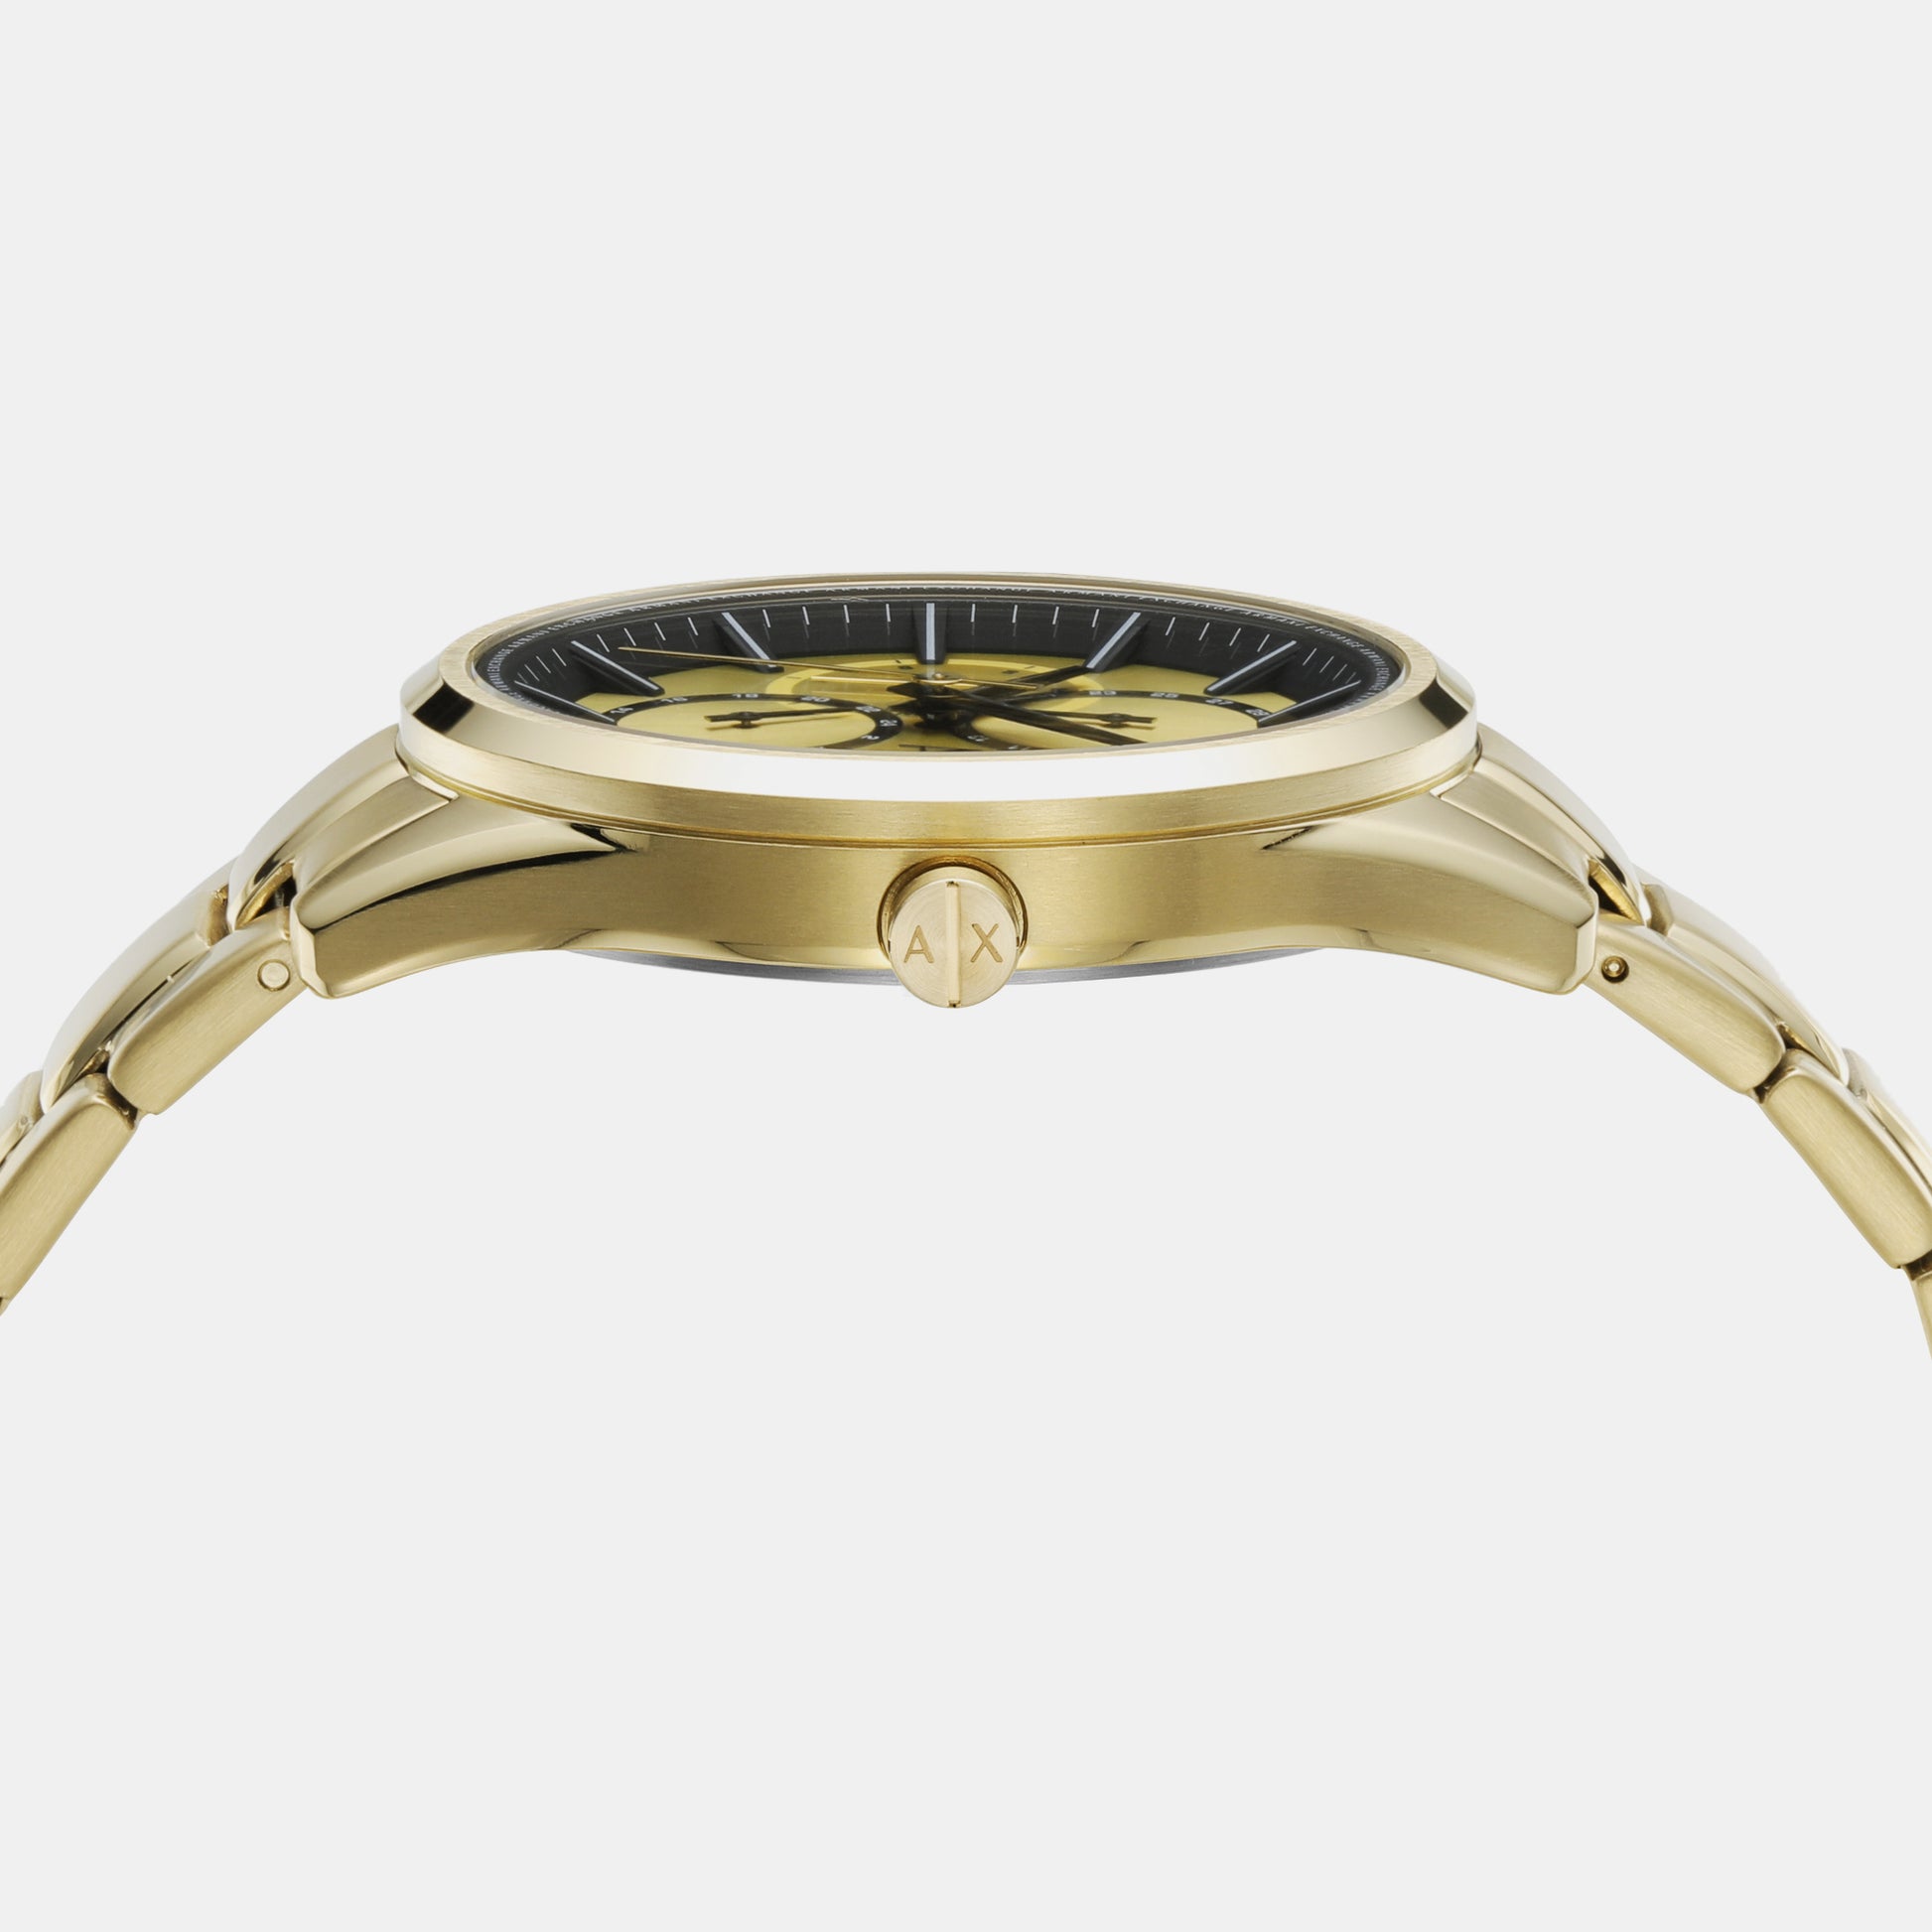 Time Chronograph Male Stainless Steel Just Gold – Watch AX1866 In